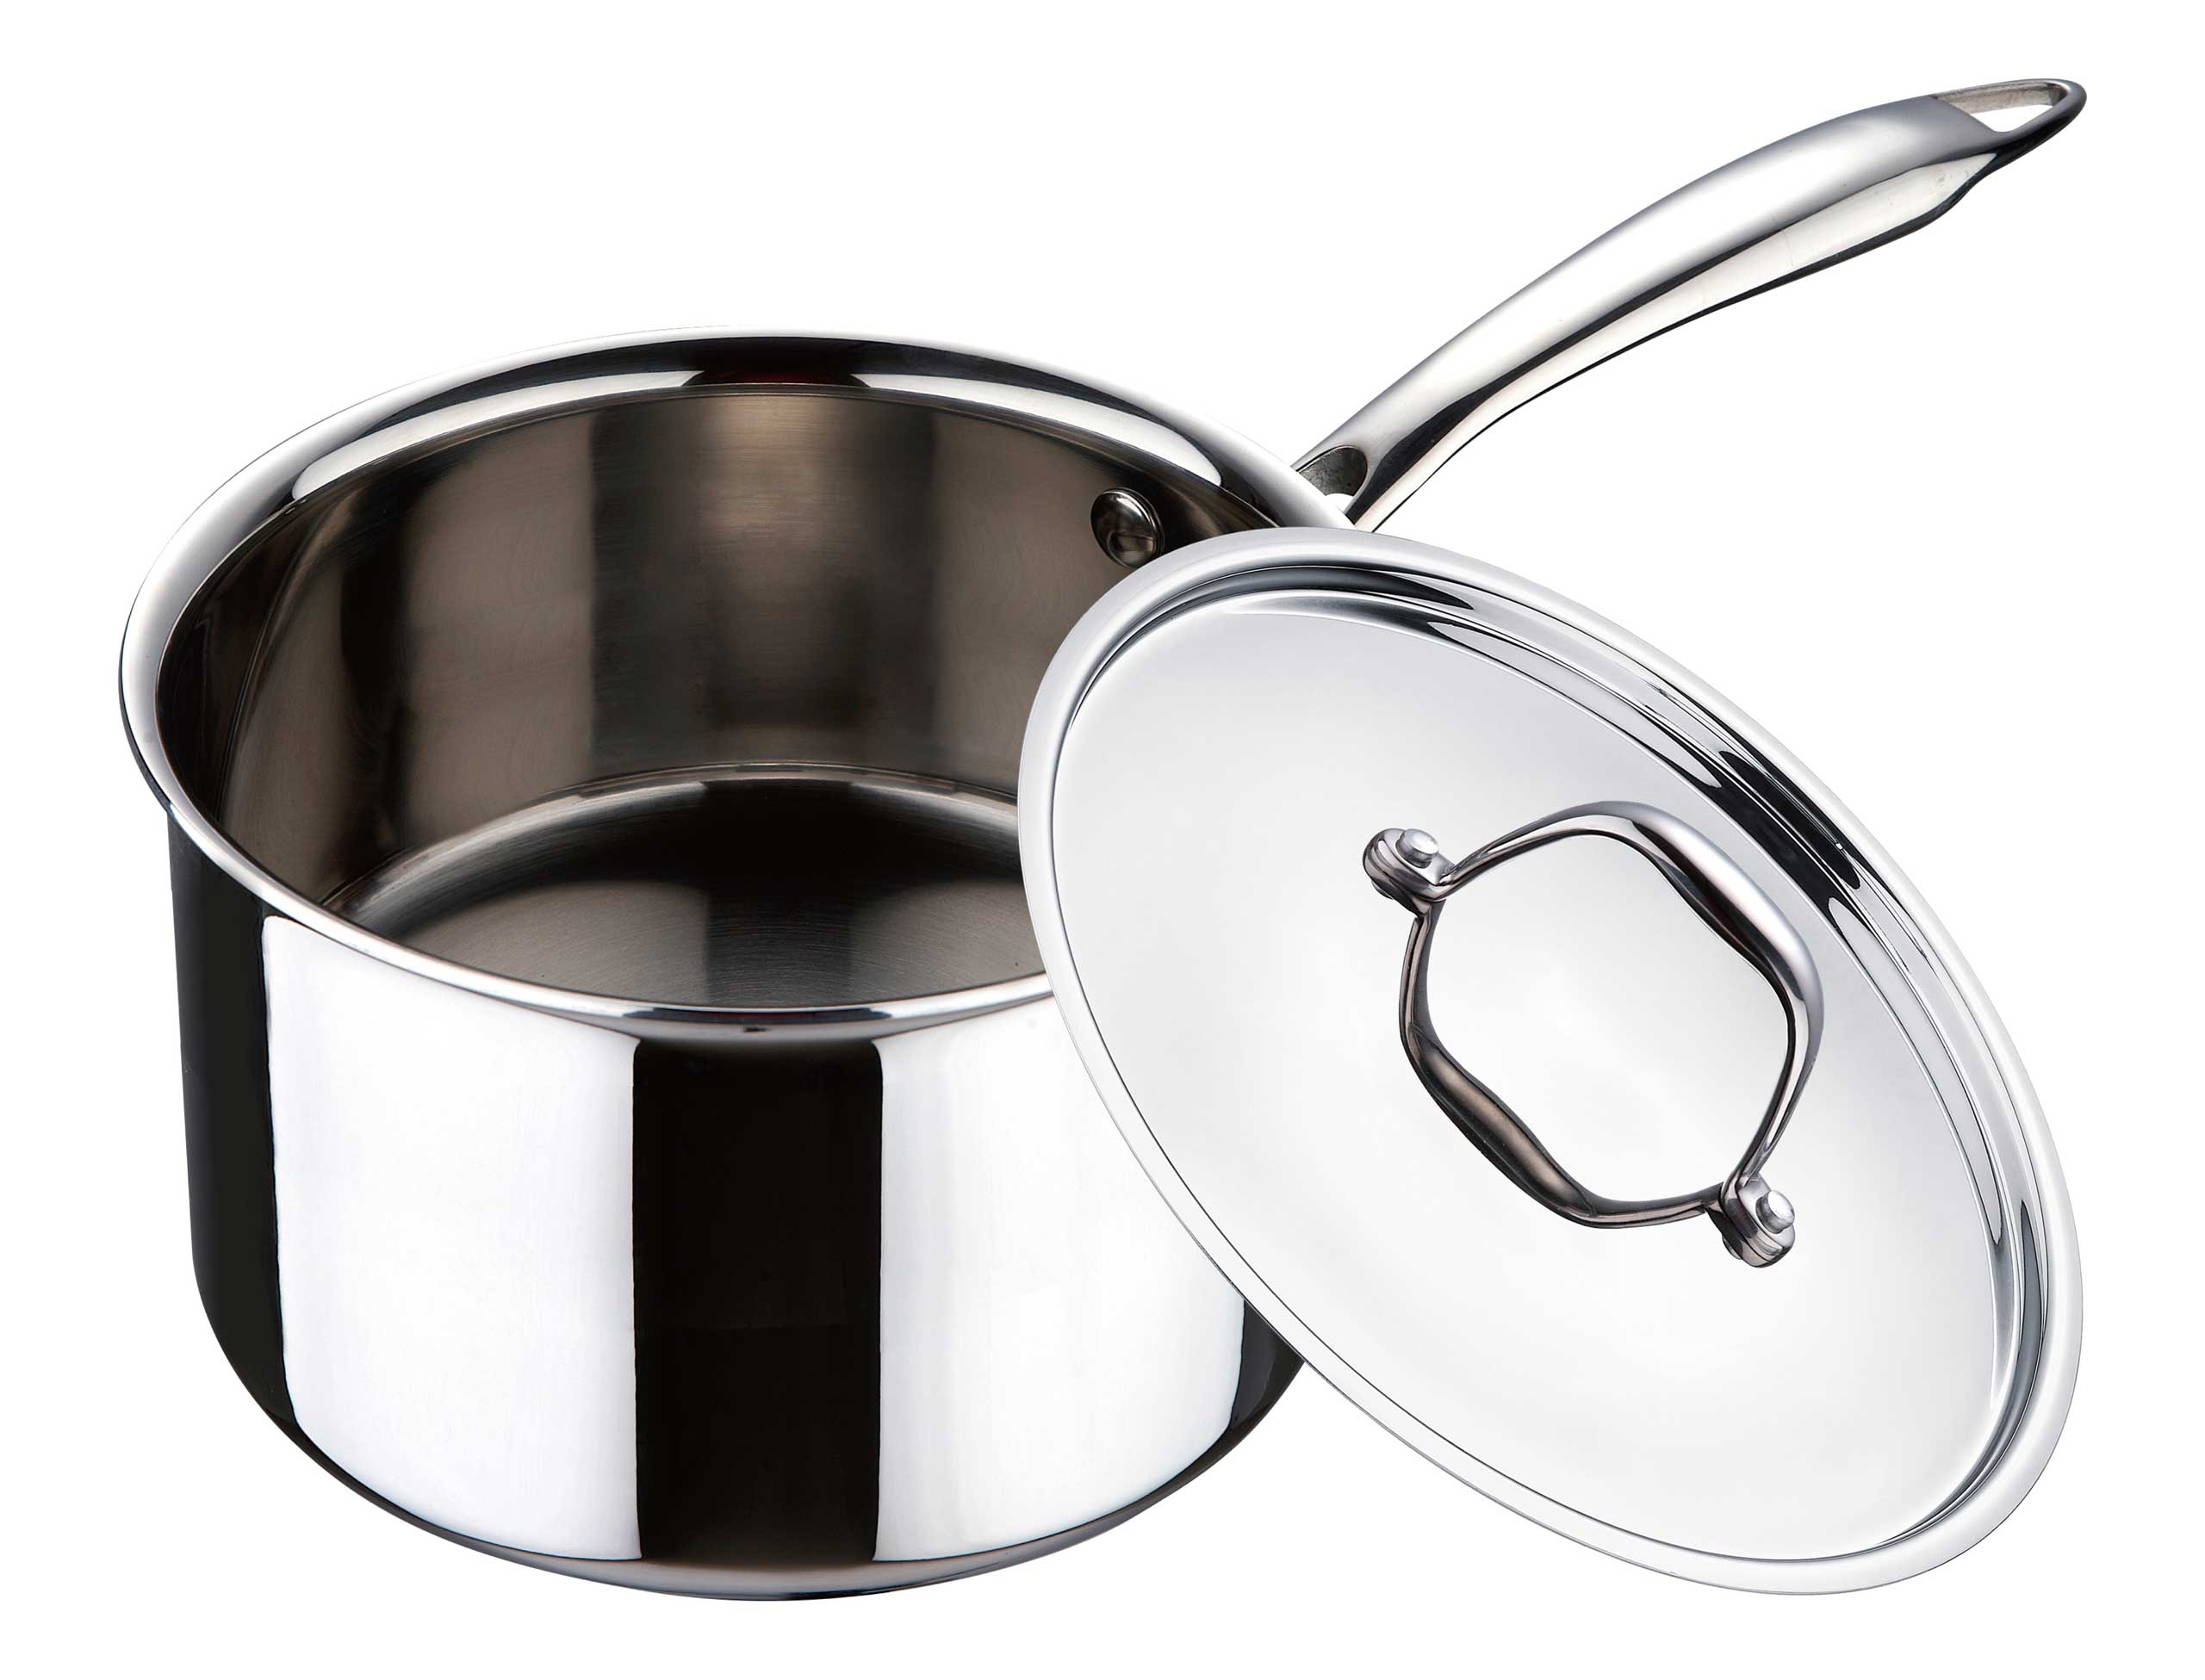 Bergner Argent Tri-Ply Silver Stainless Steel Tadka Pan in 12 cm size